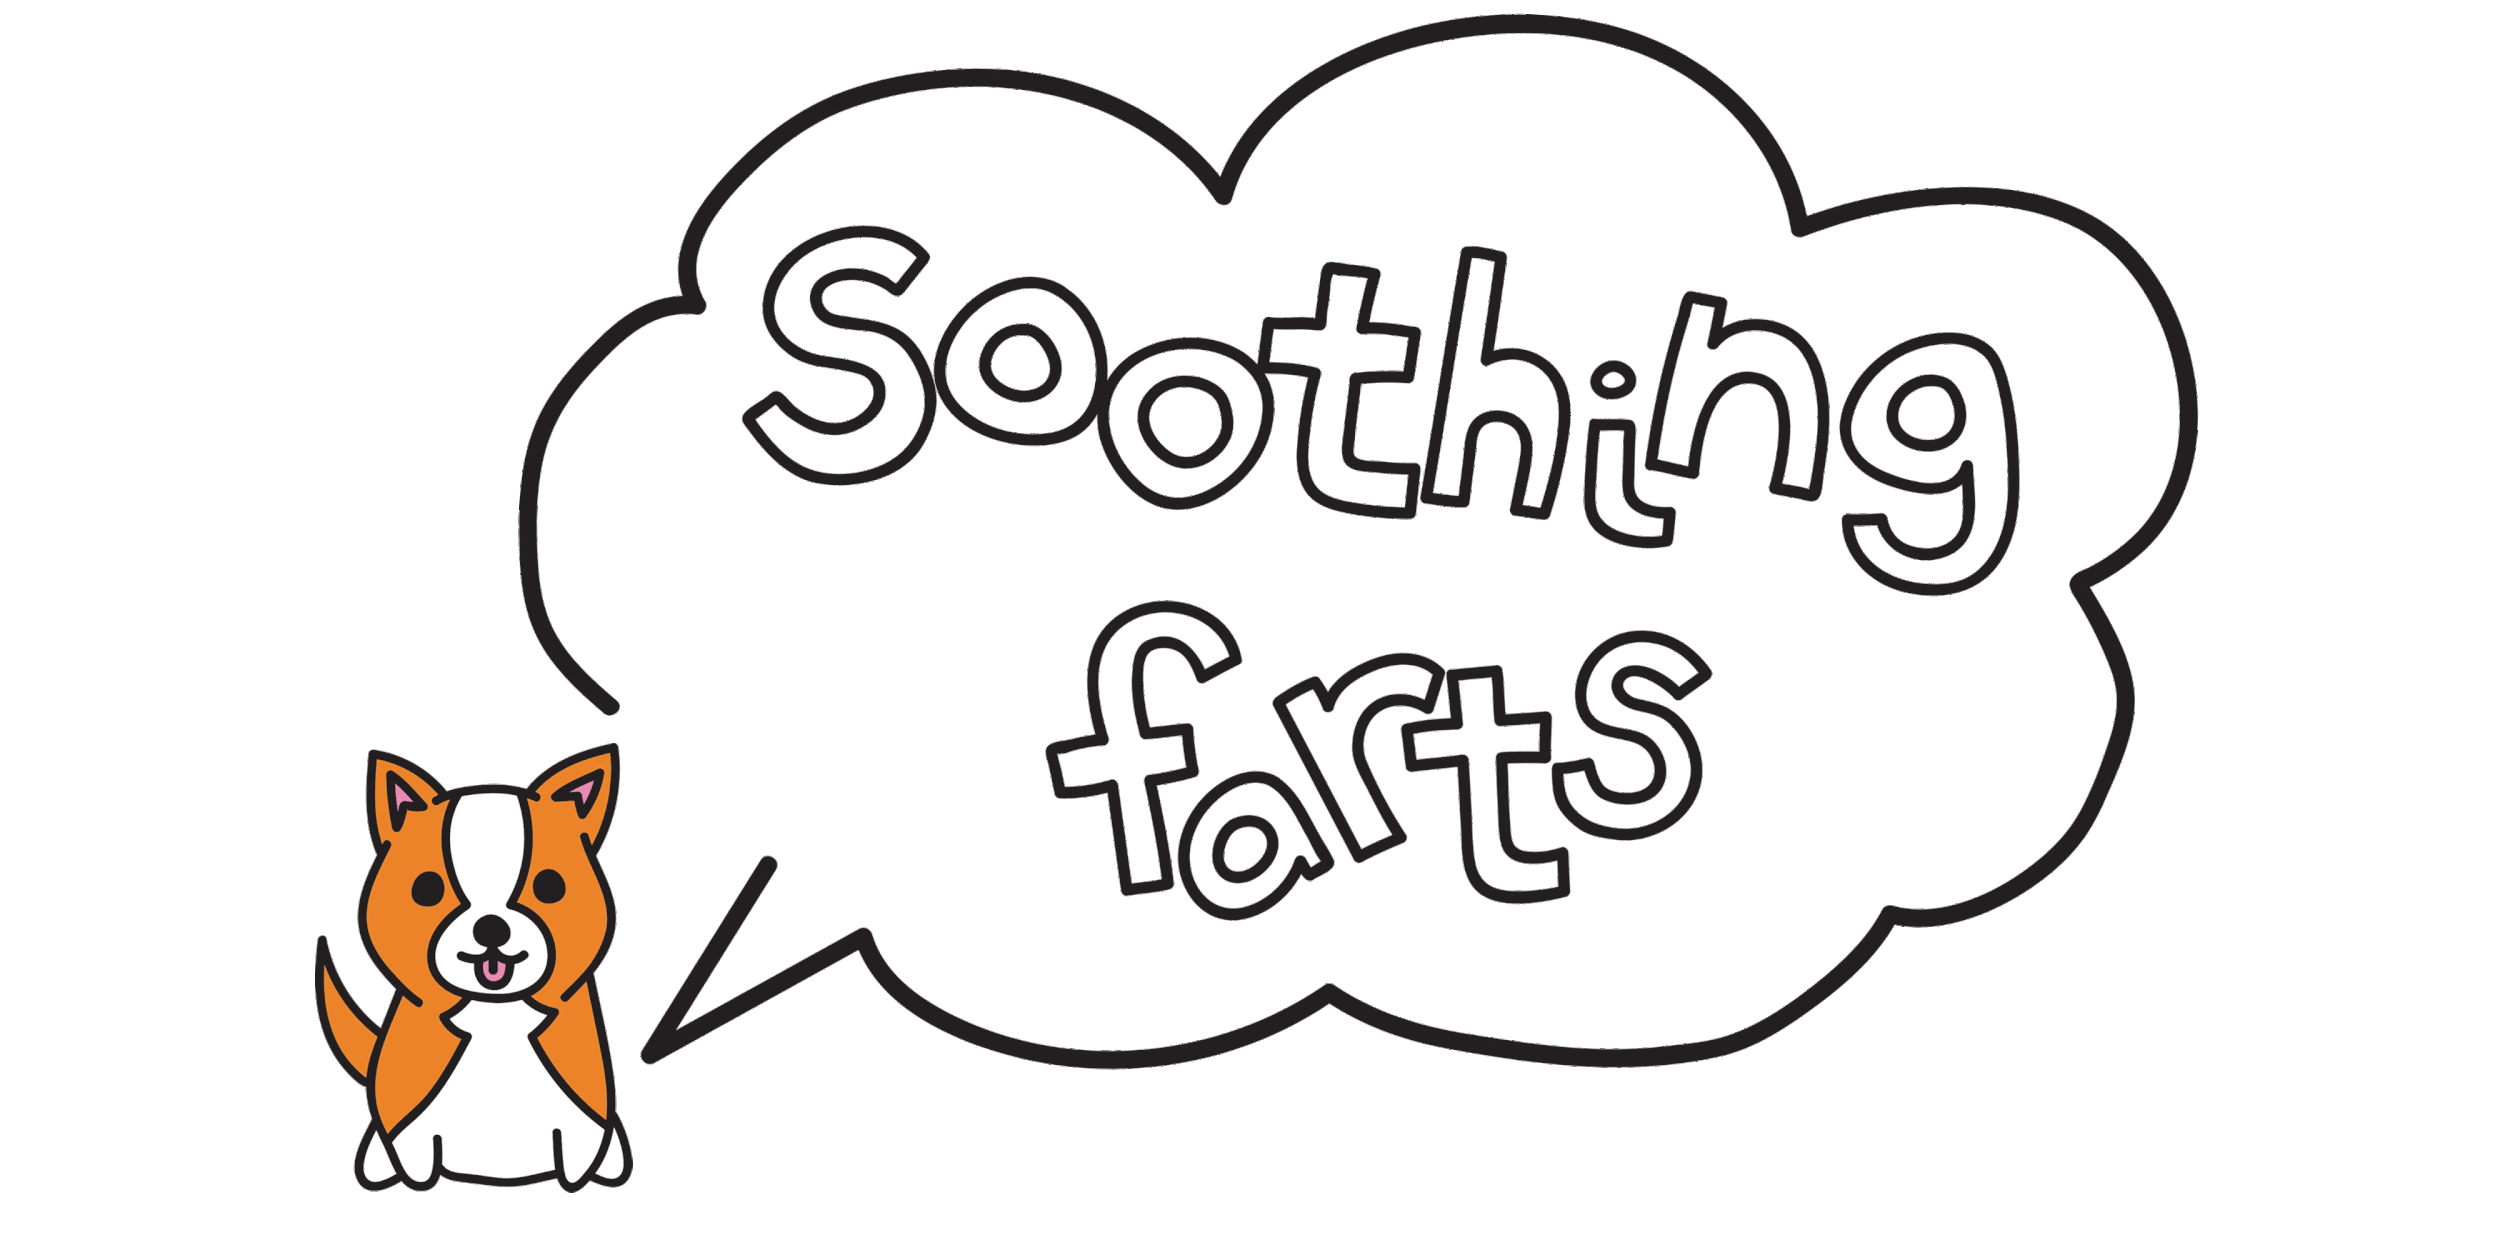 soothing farts